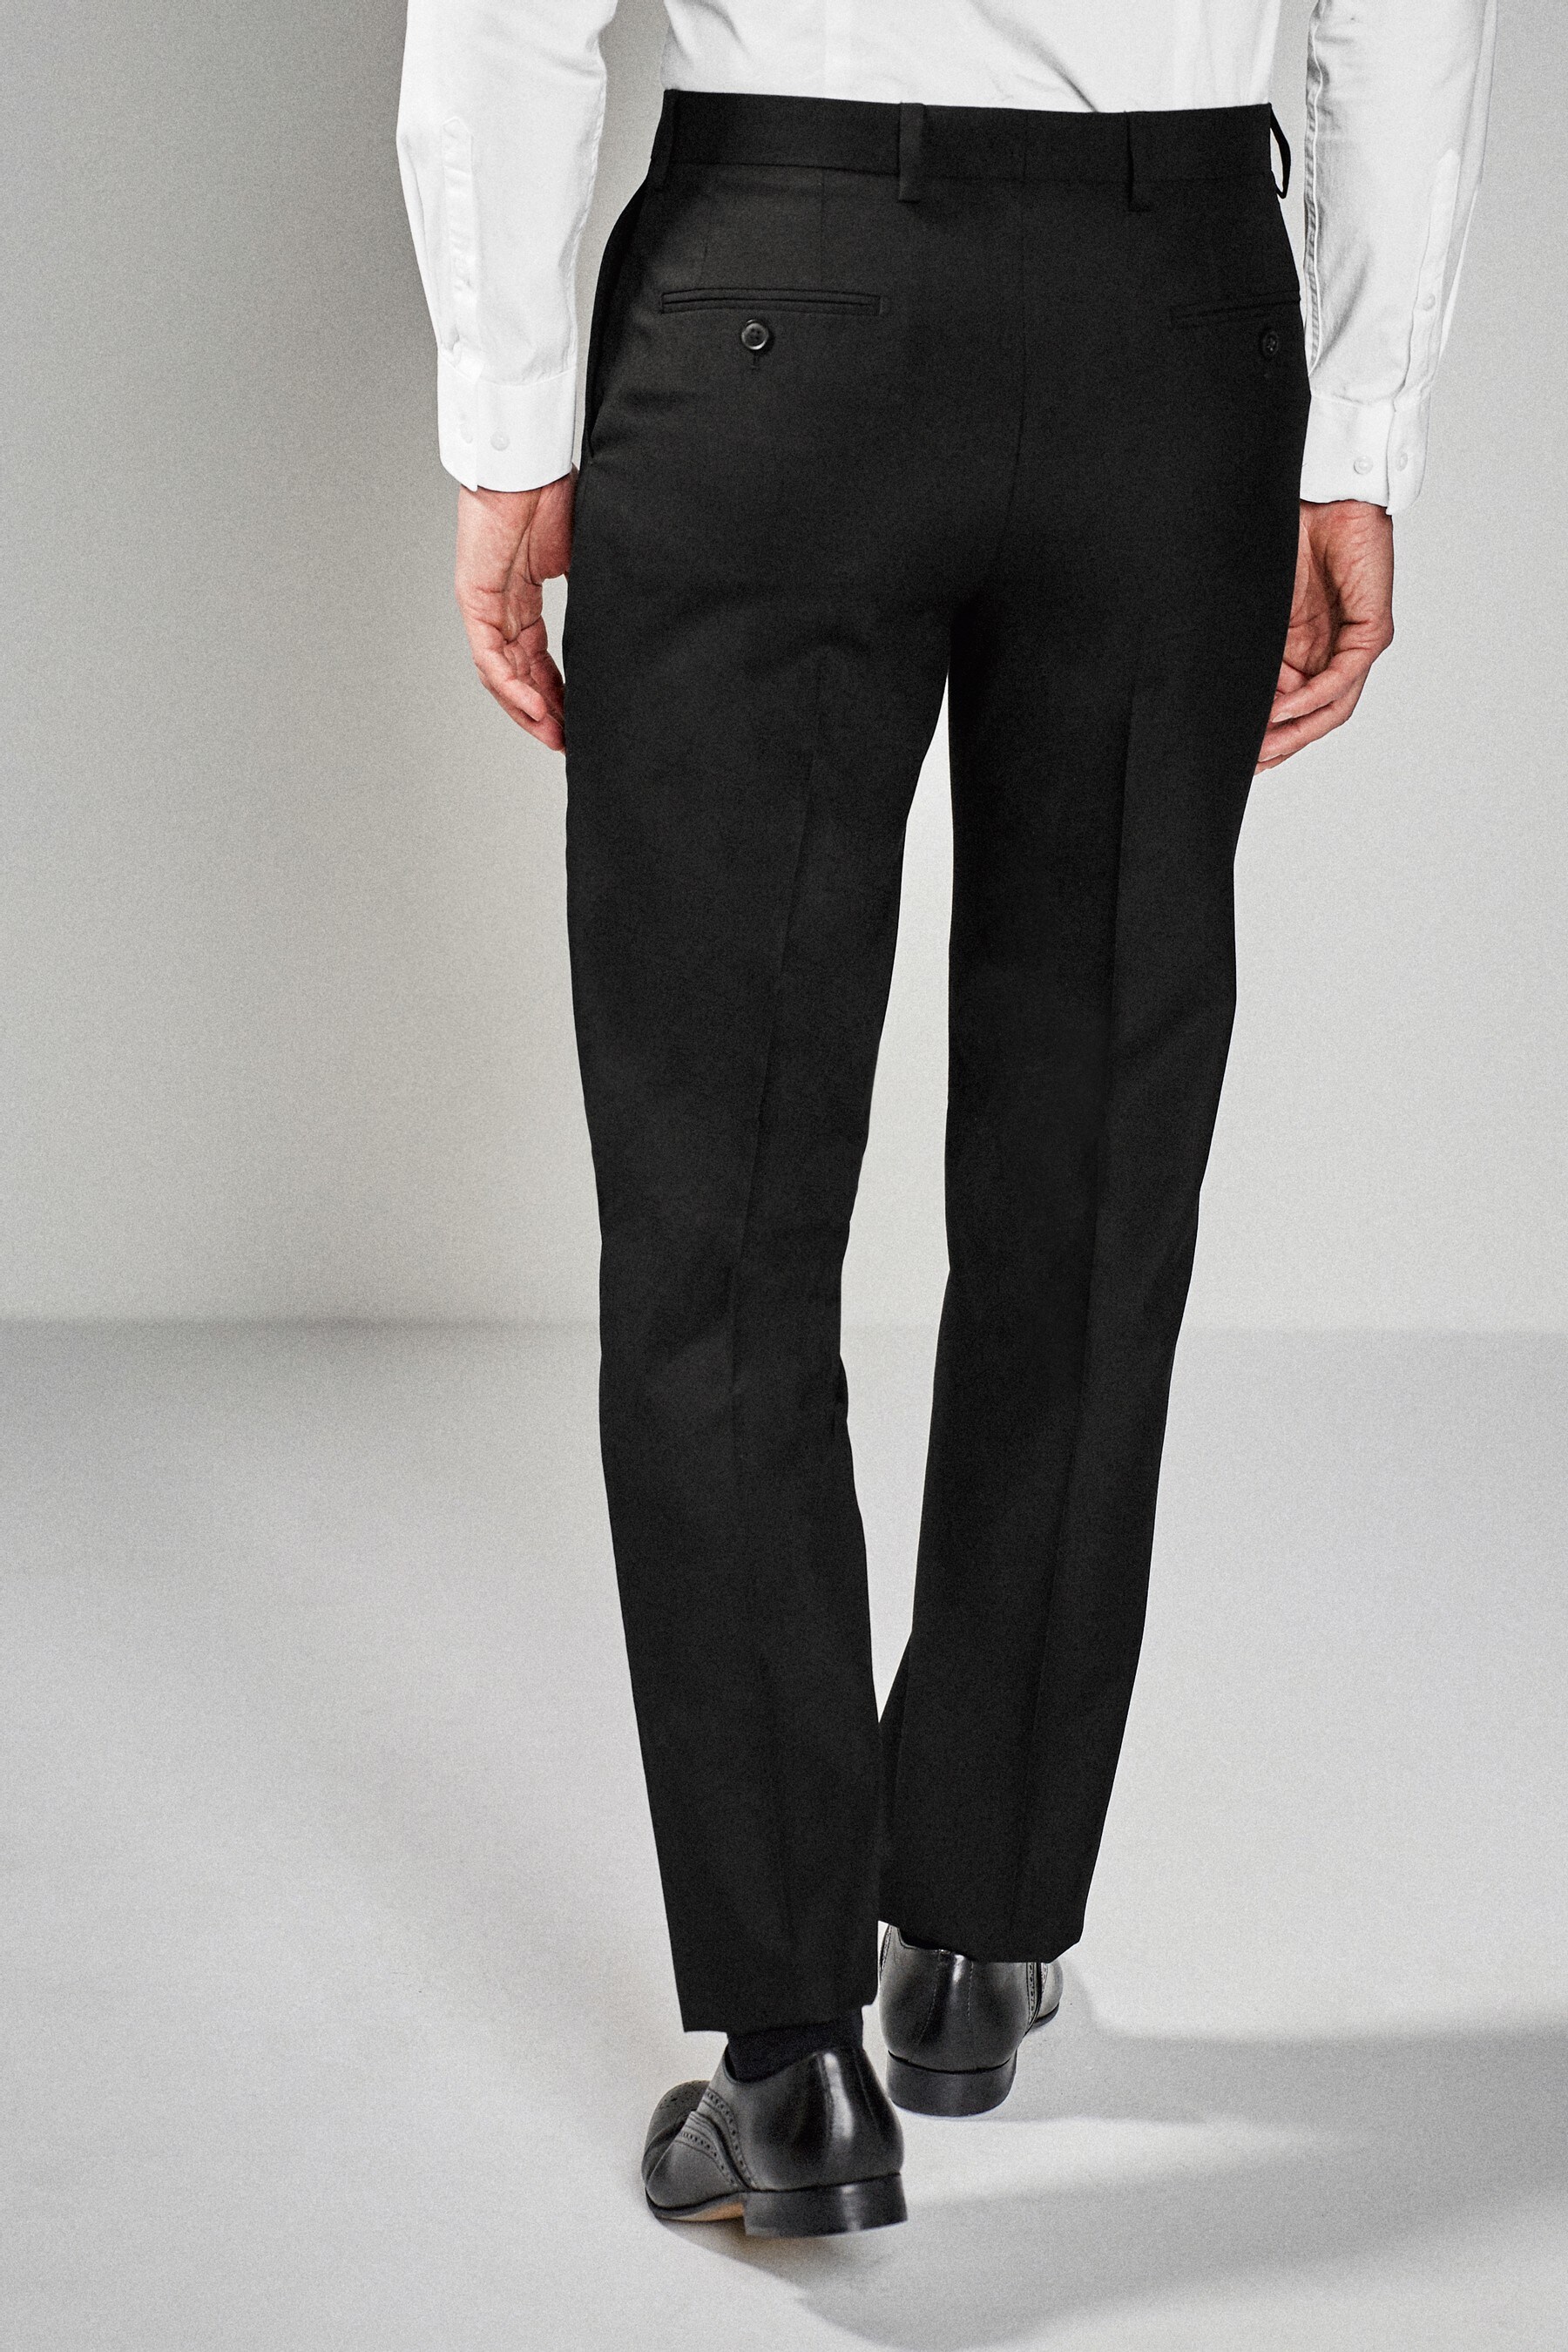 Buy Black Regular Fit Suit: Trousers from the Next UK online shop